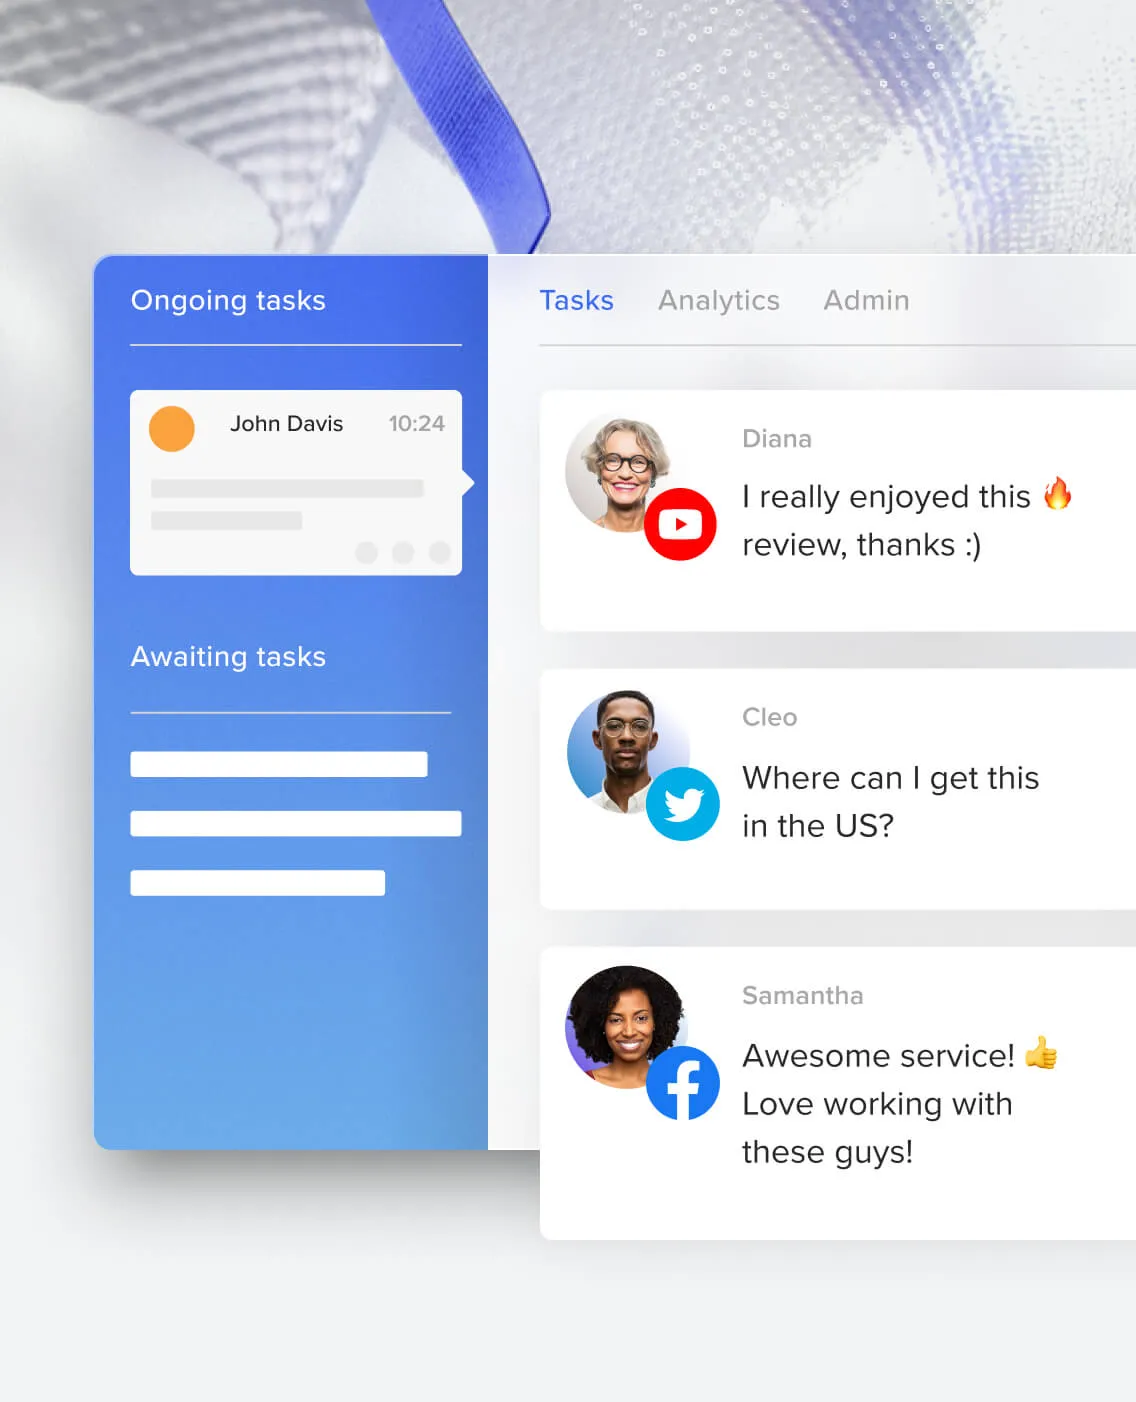 RingCentral's digital customer engagement platform allows businesess to connect with customers on Facebook, Twitter, Instagram, YouTube, and other social media apps